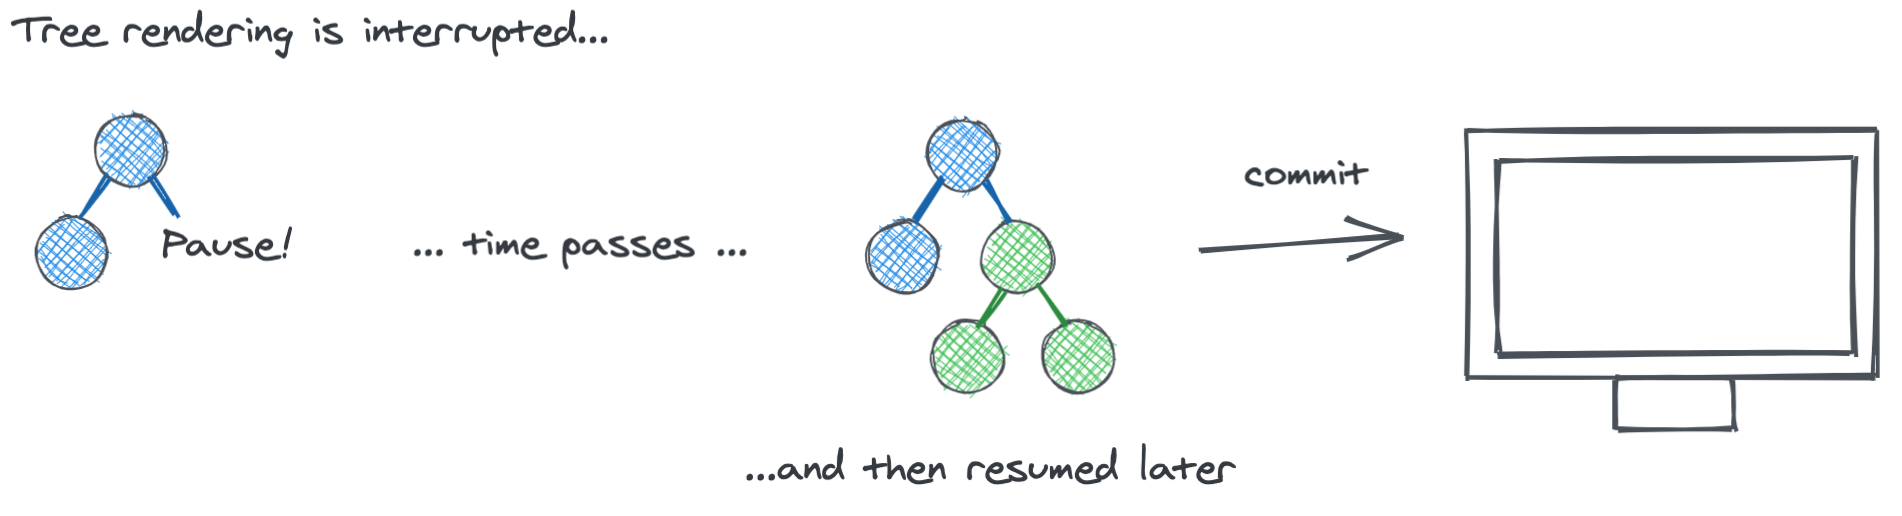 React pauses while rendering a tree of components. Some components are rendered before the pause while others are rendered after the pause.